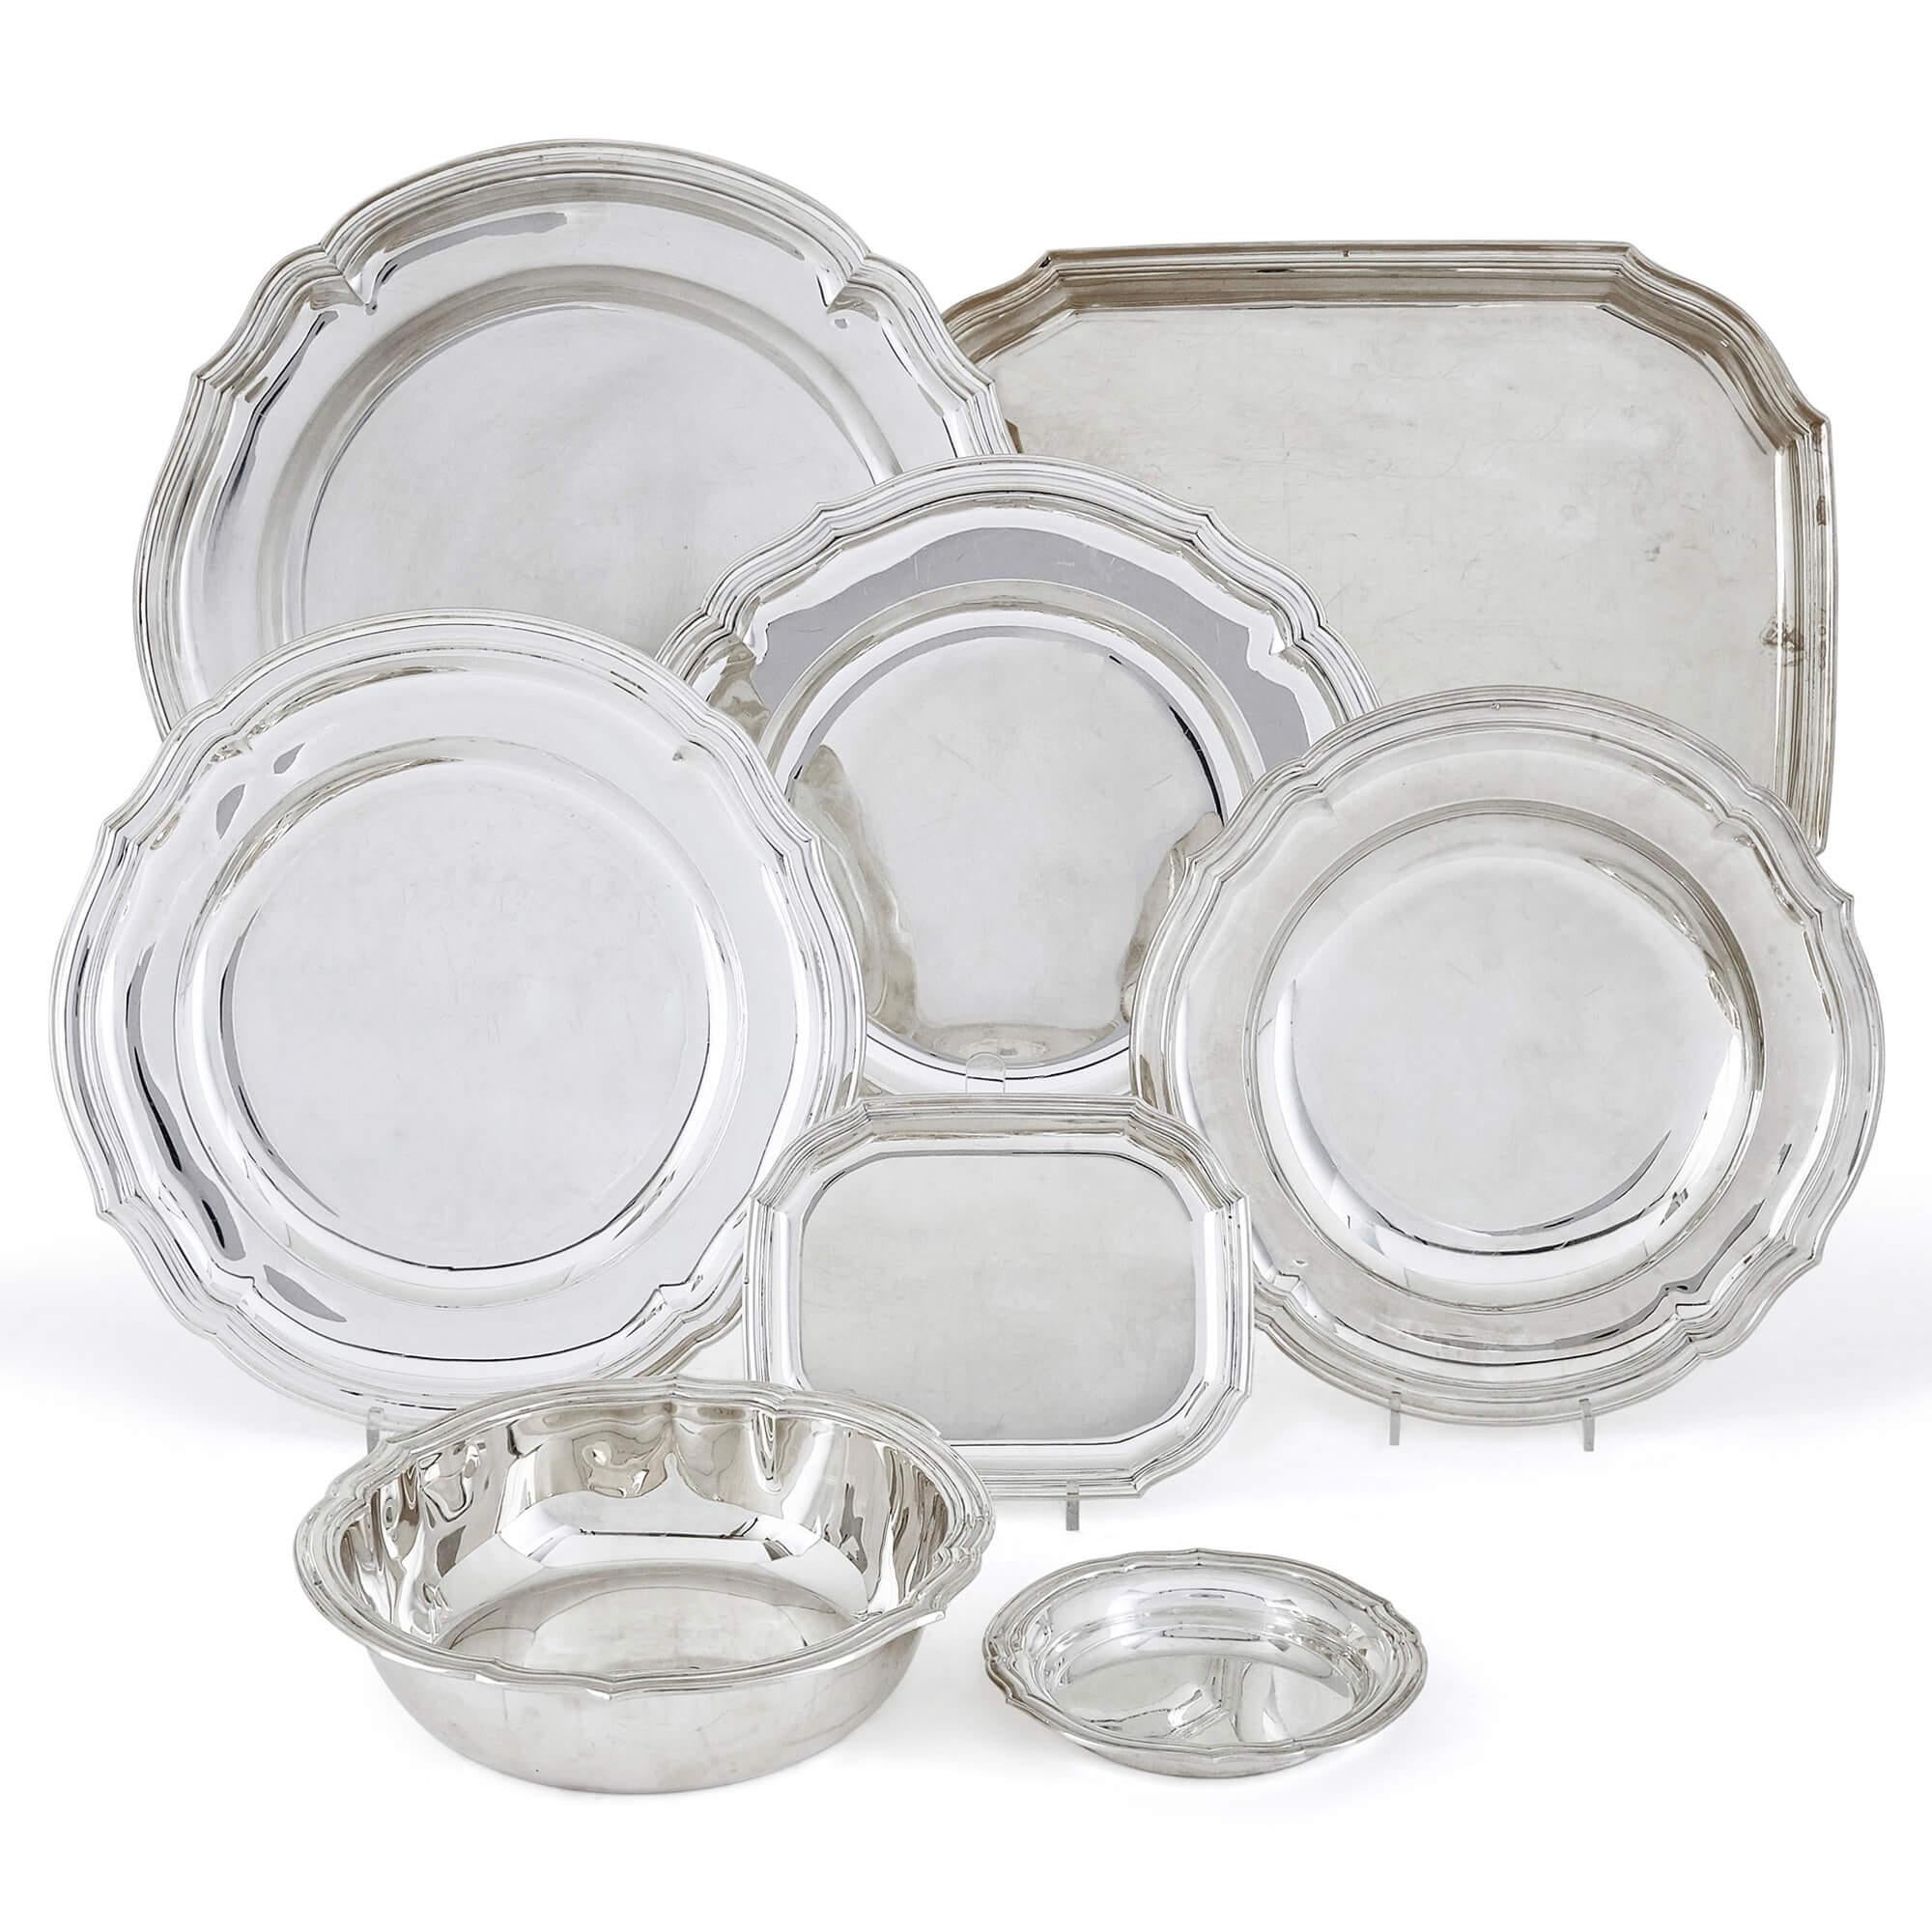 A large collection of silverware by Tétard Frères
French, Early 20th century
Total weight: 29,400 grams
Measures: Large trays: height 2cm, width 50cm, depth 40cm
Small cups: height 5cm, diameter 5cm

This extensive collection of very fine